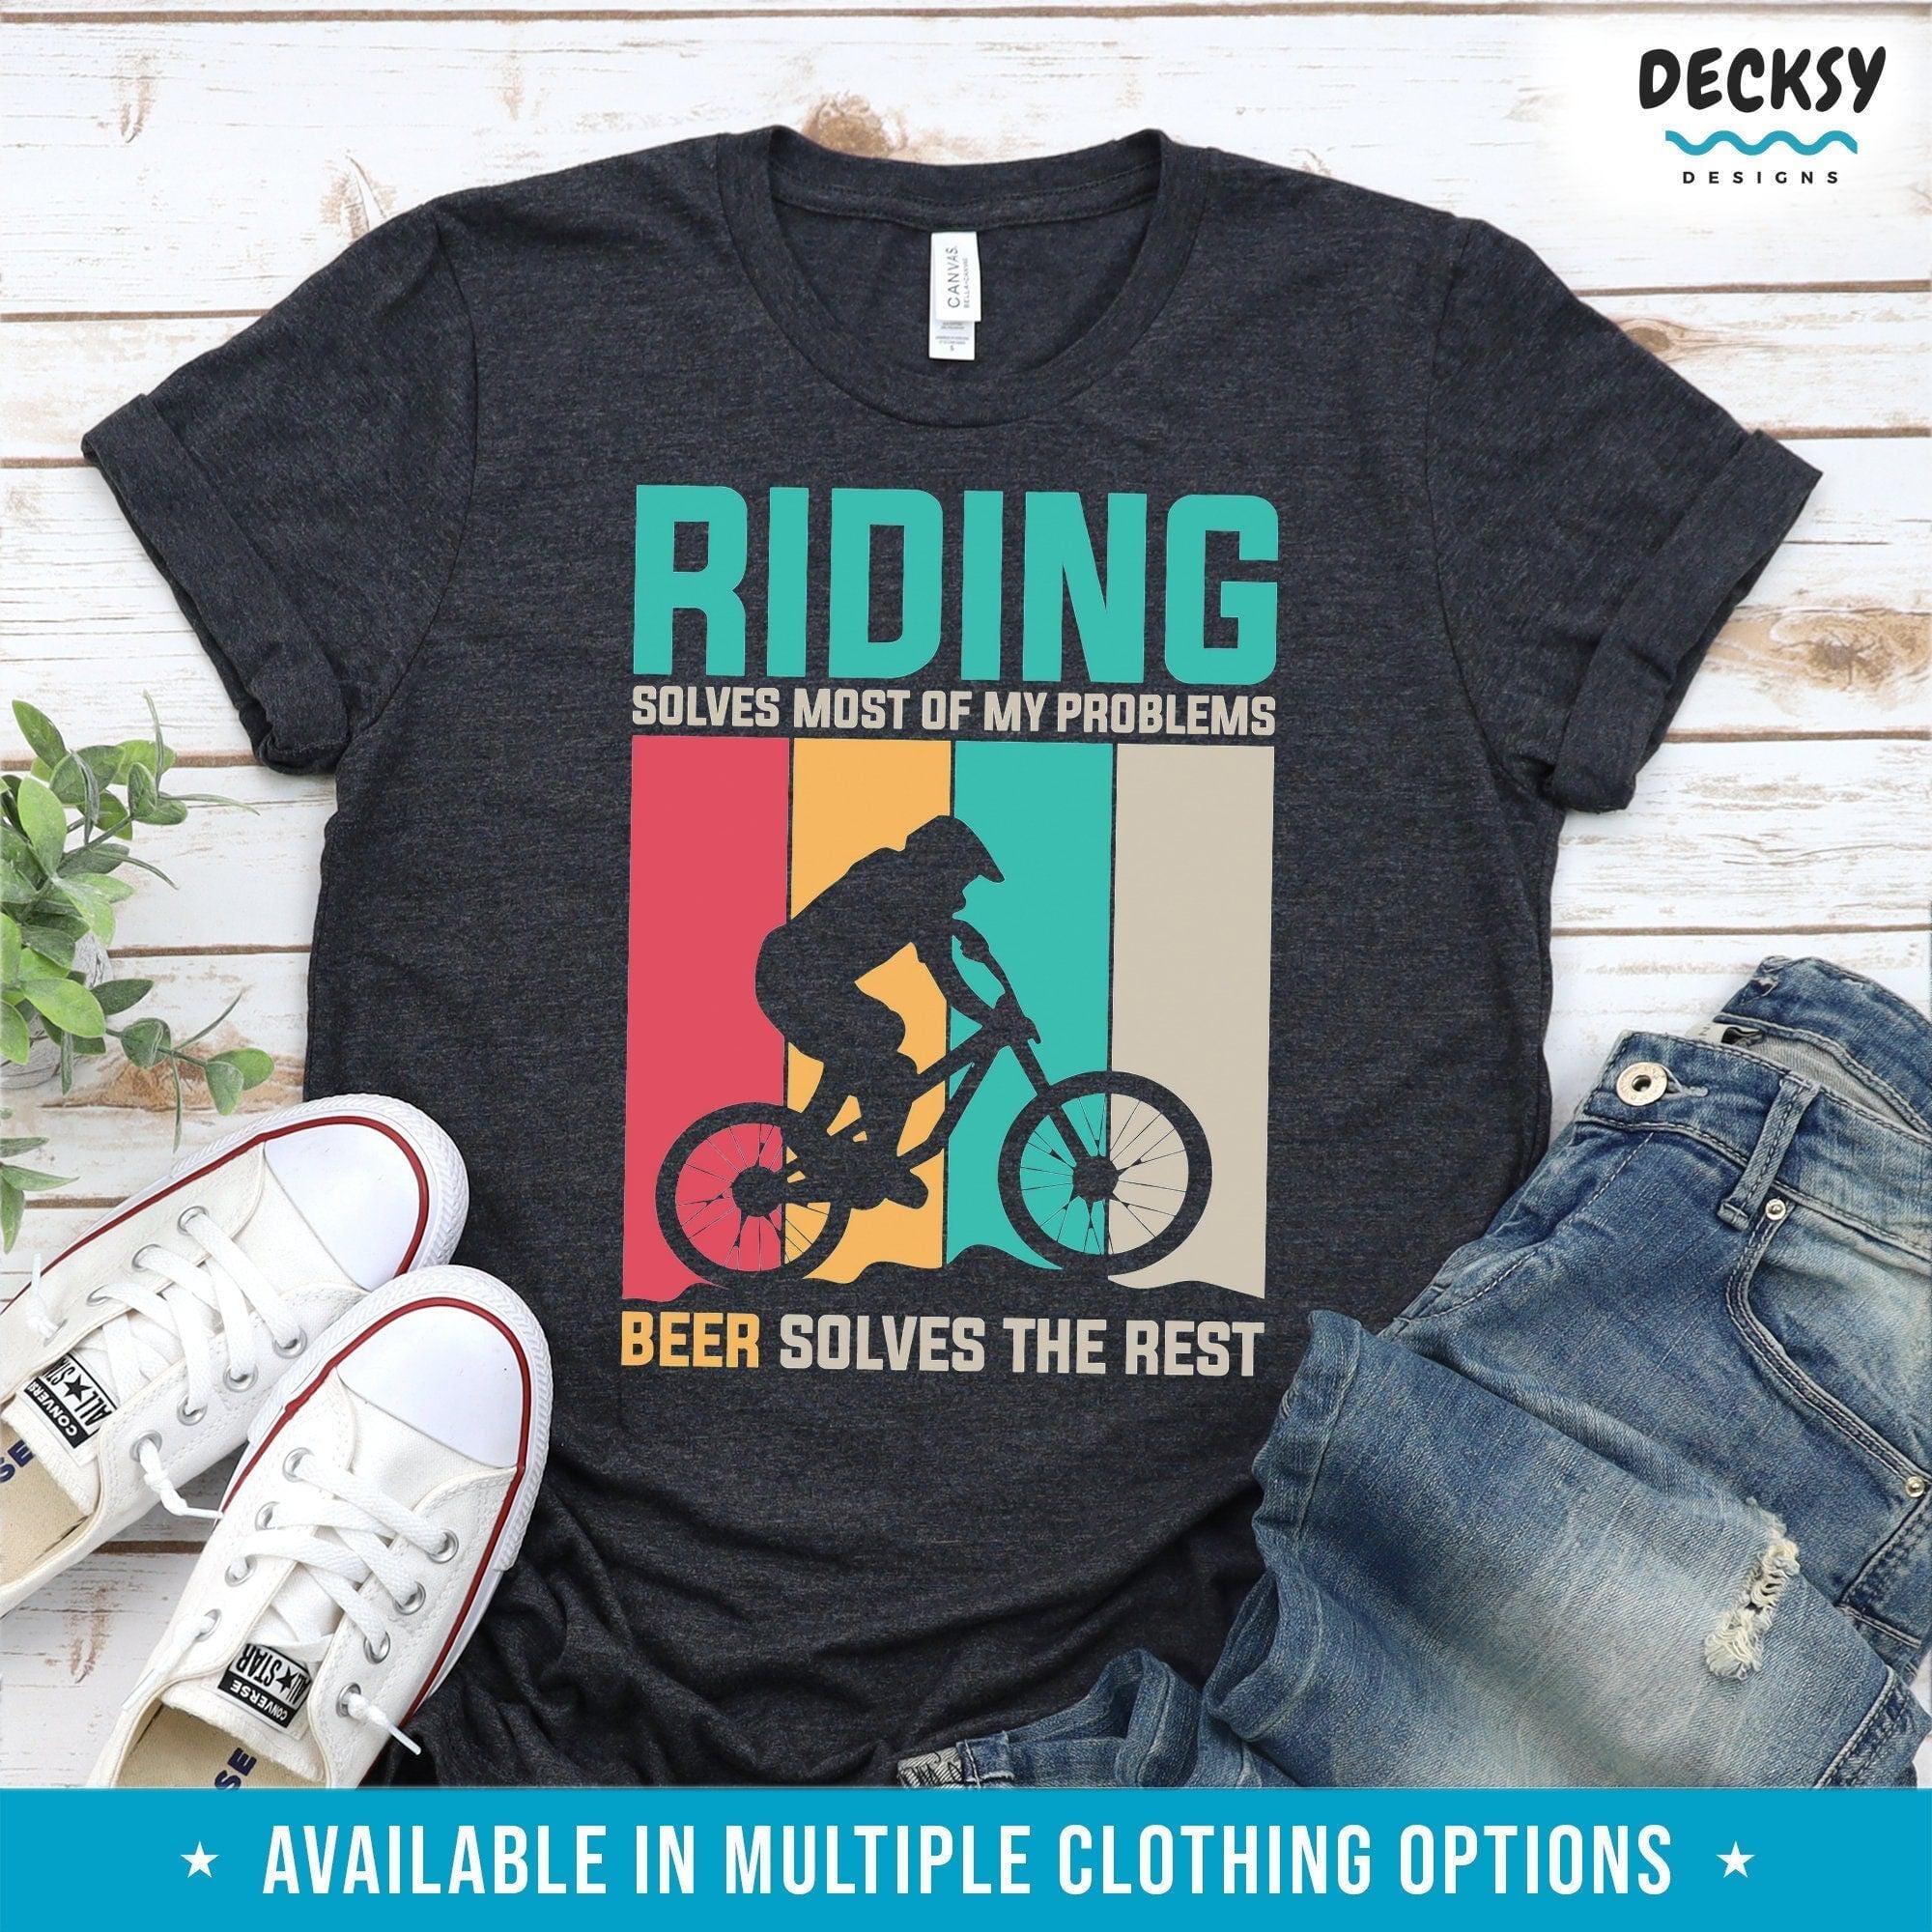 Cycling Shirt, Gift For Beer Lovers-Clothing:Gender-Neutral Adult Clothing:Tops & Tees:T-shirts:Graphic Tees-DecksyDesigns